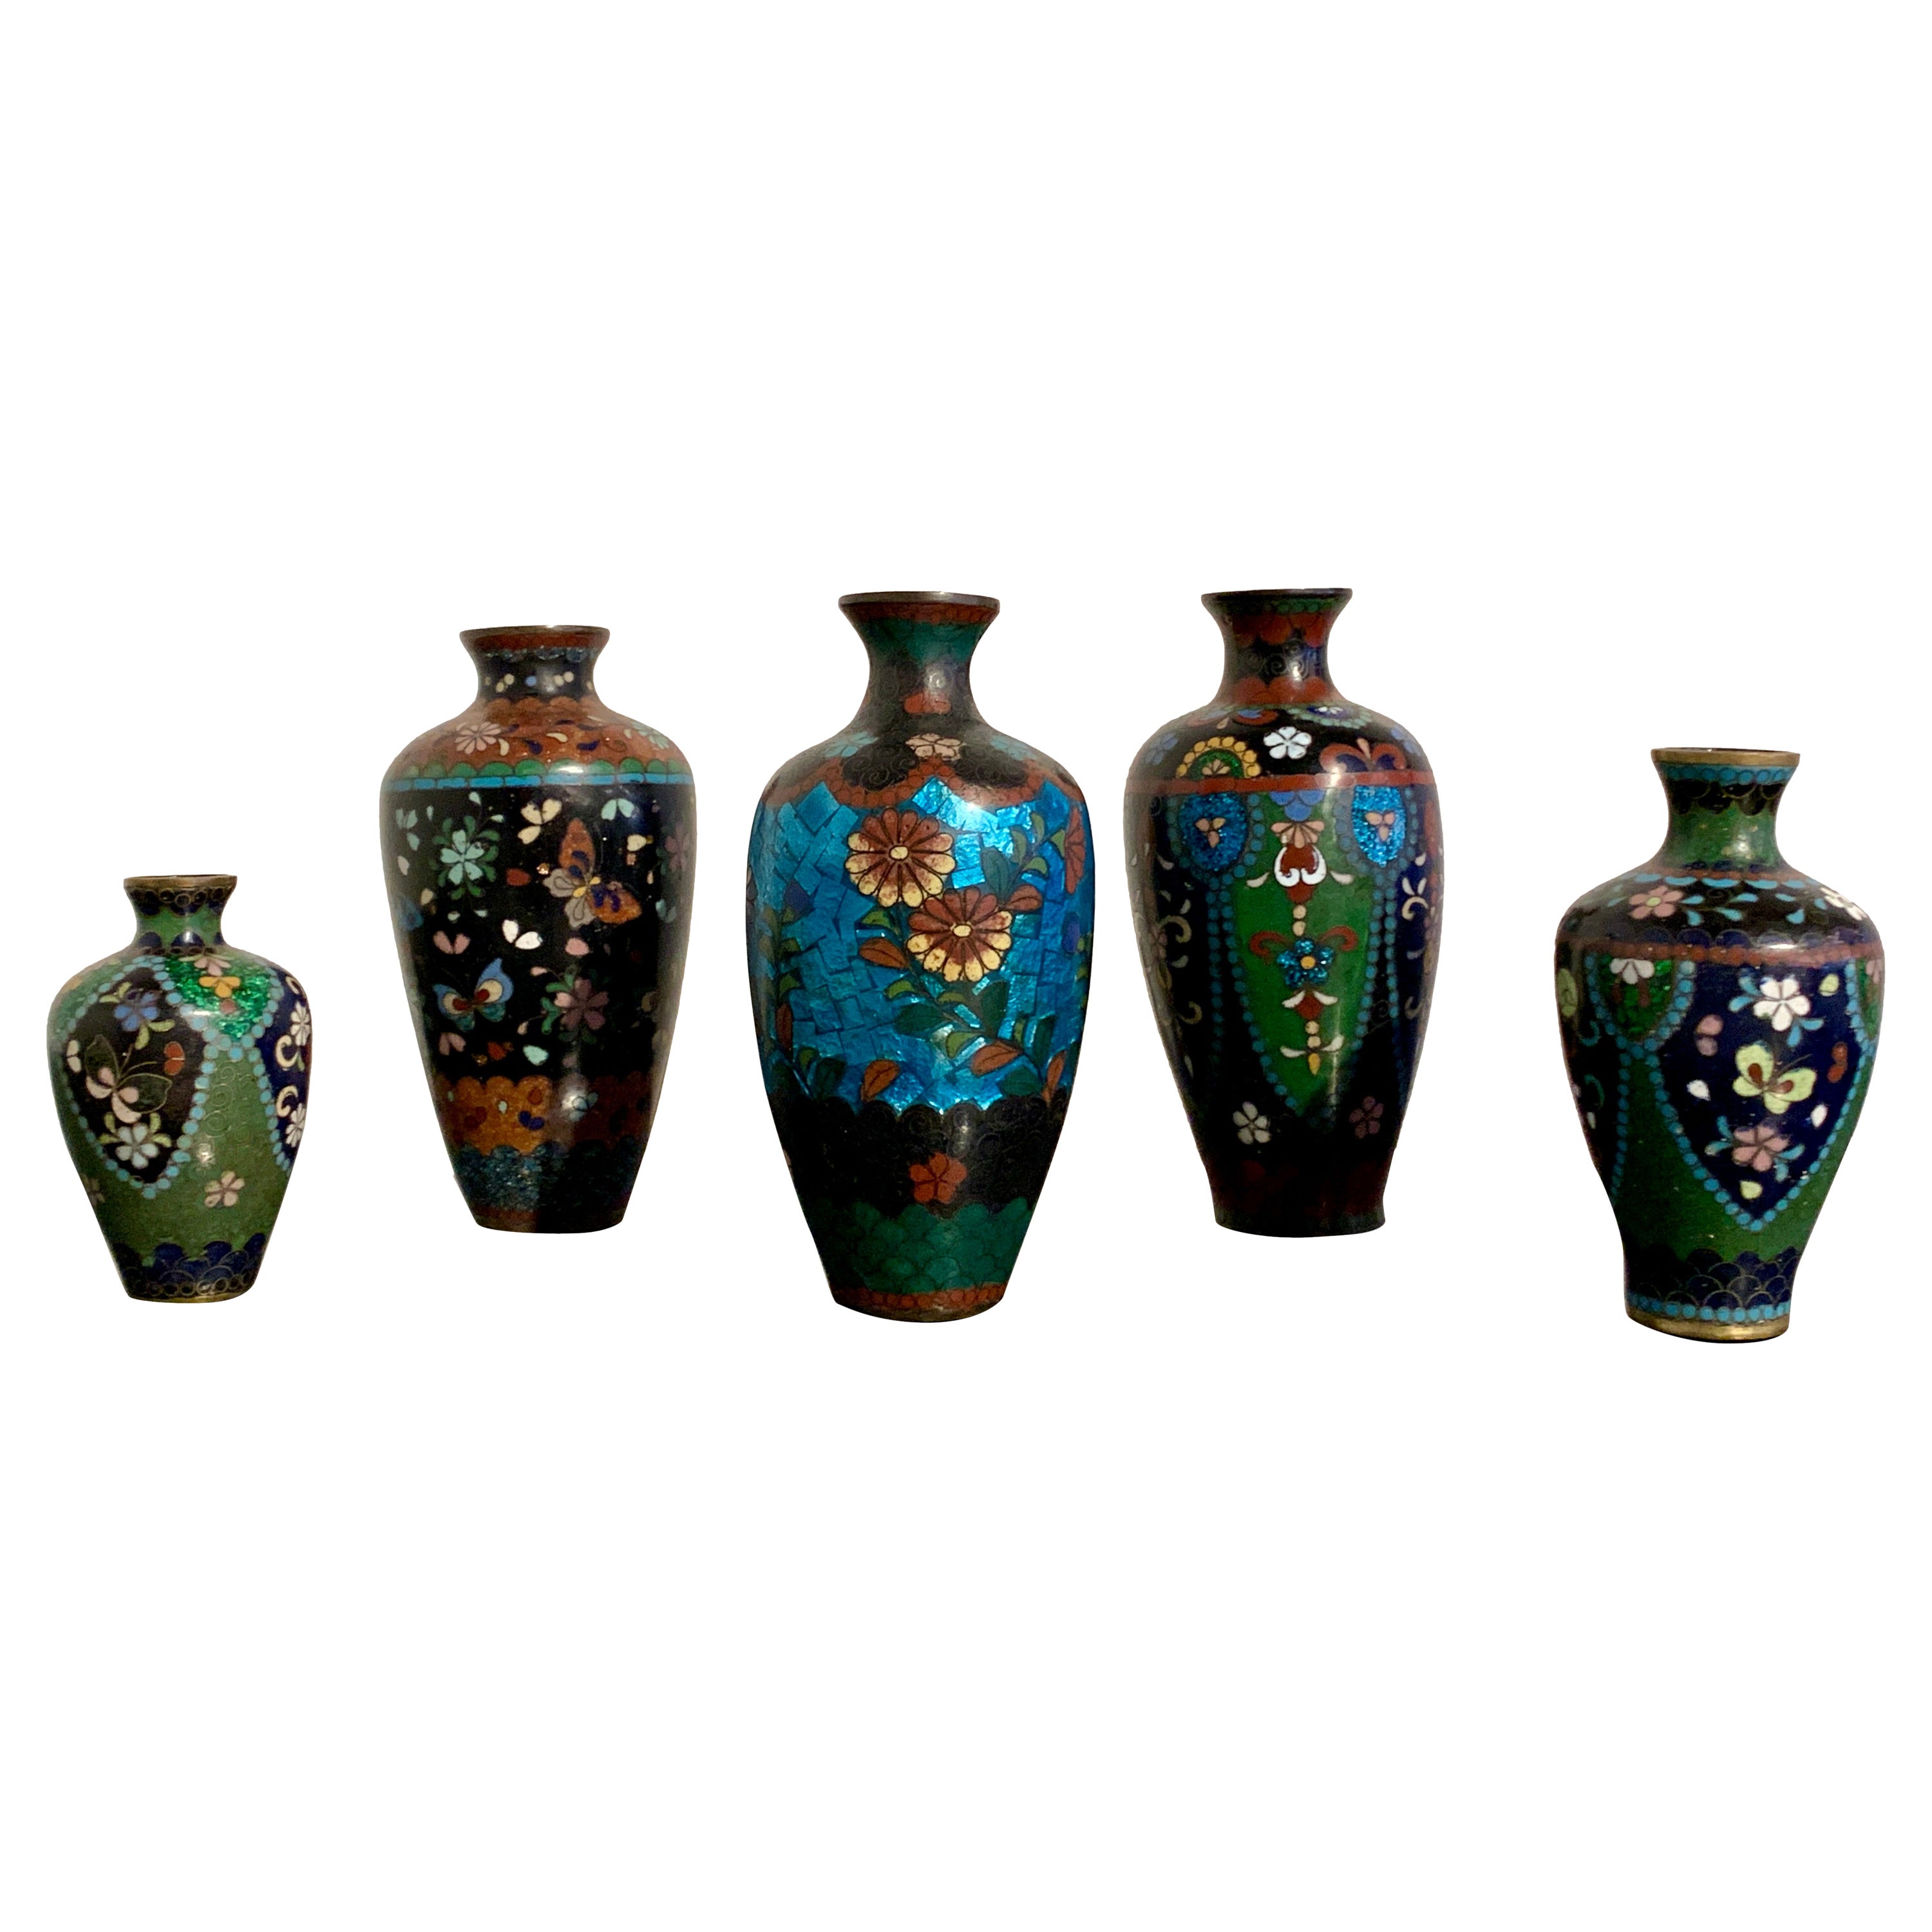 Group of 5 Small Japanese Cloisonne and Ginbari Vases, Early 20th Century, Japan